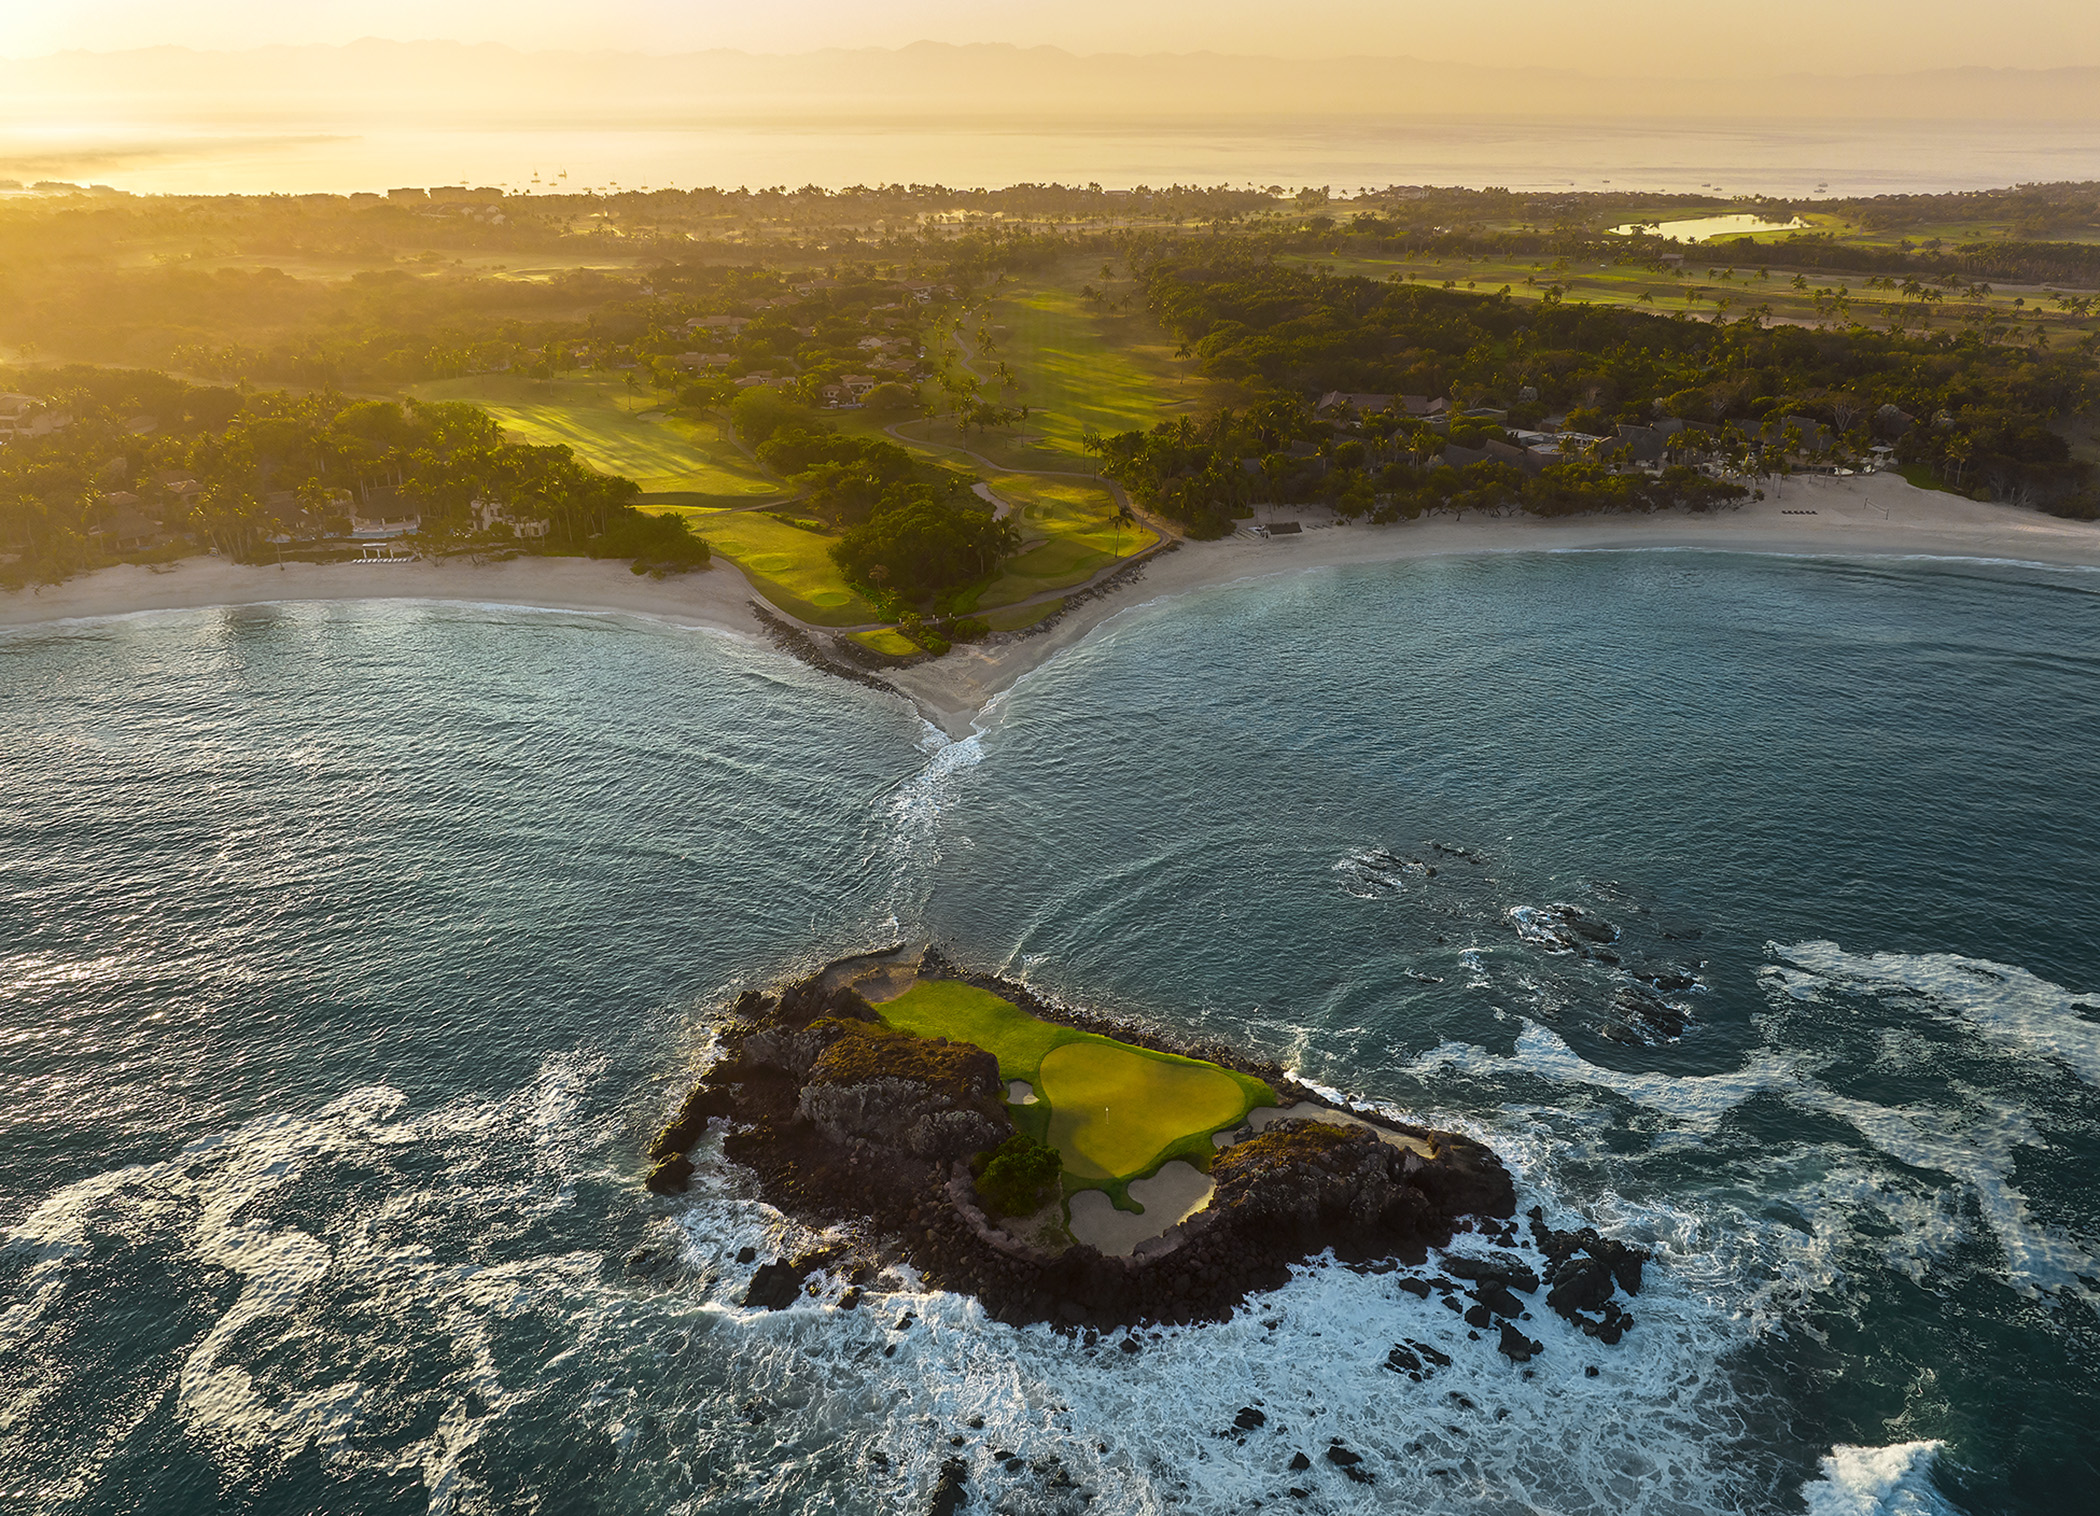 Tail Of The Whale - Punta Mita, Mexico -Stephen Denton Photography, Los Angeles, California based Architectural, Hospitality, & Aerial Photographer 